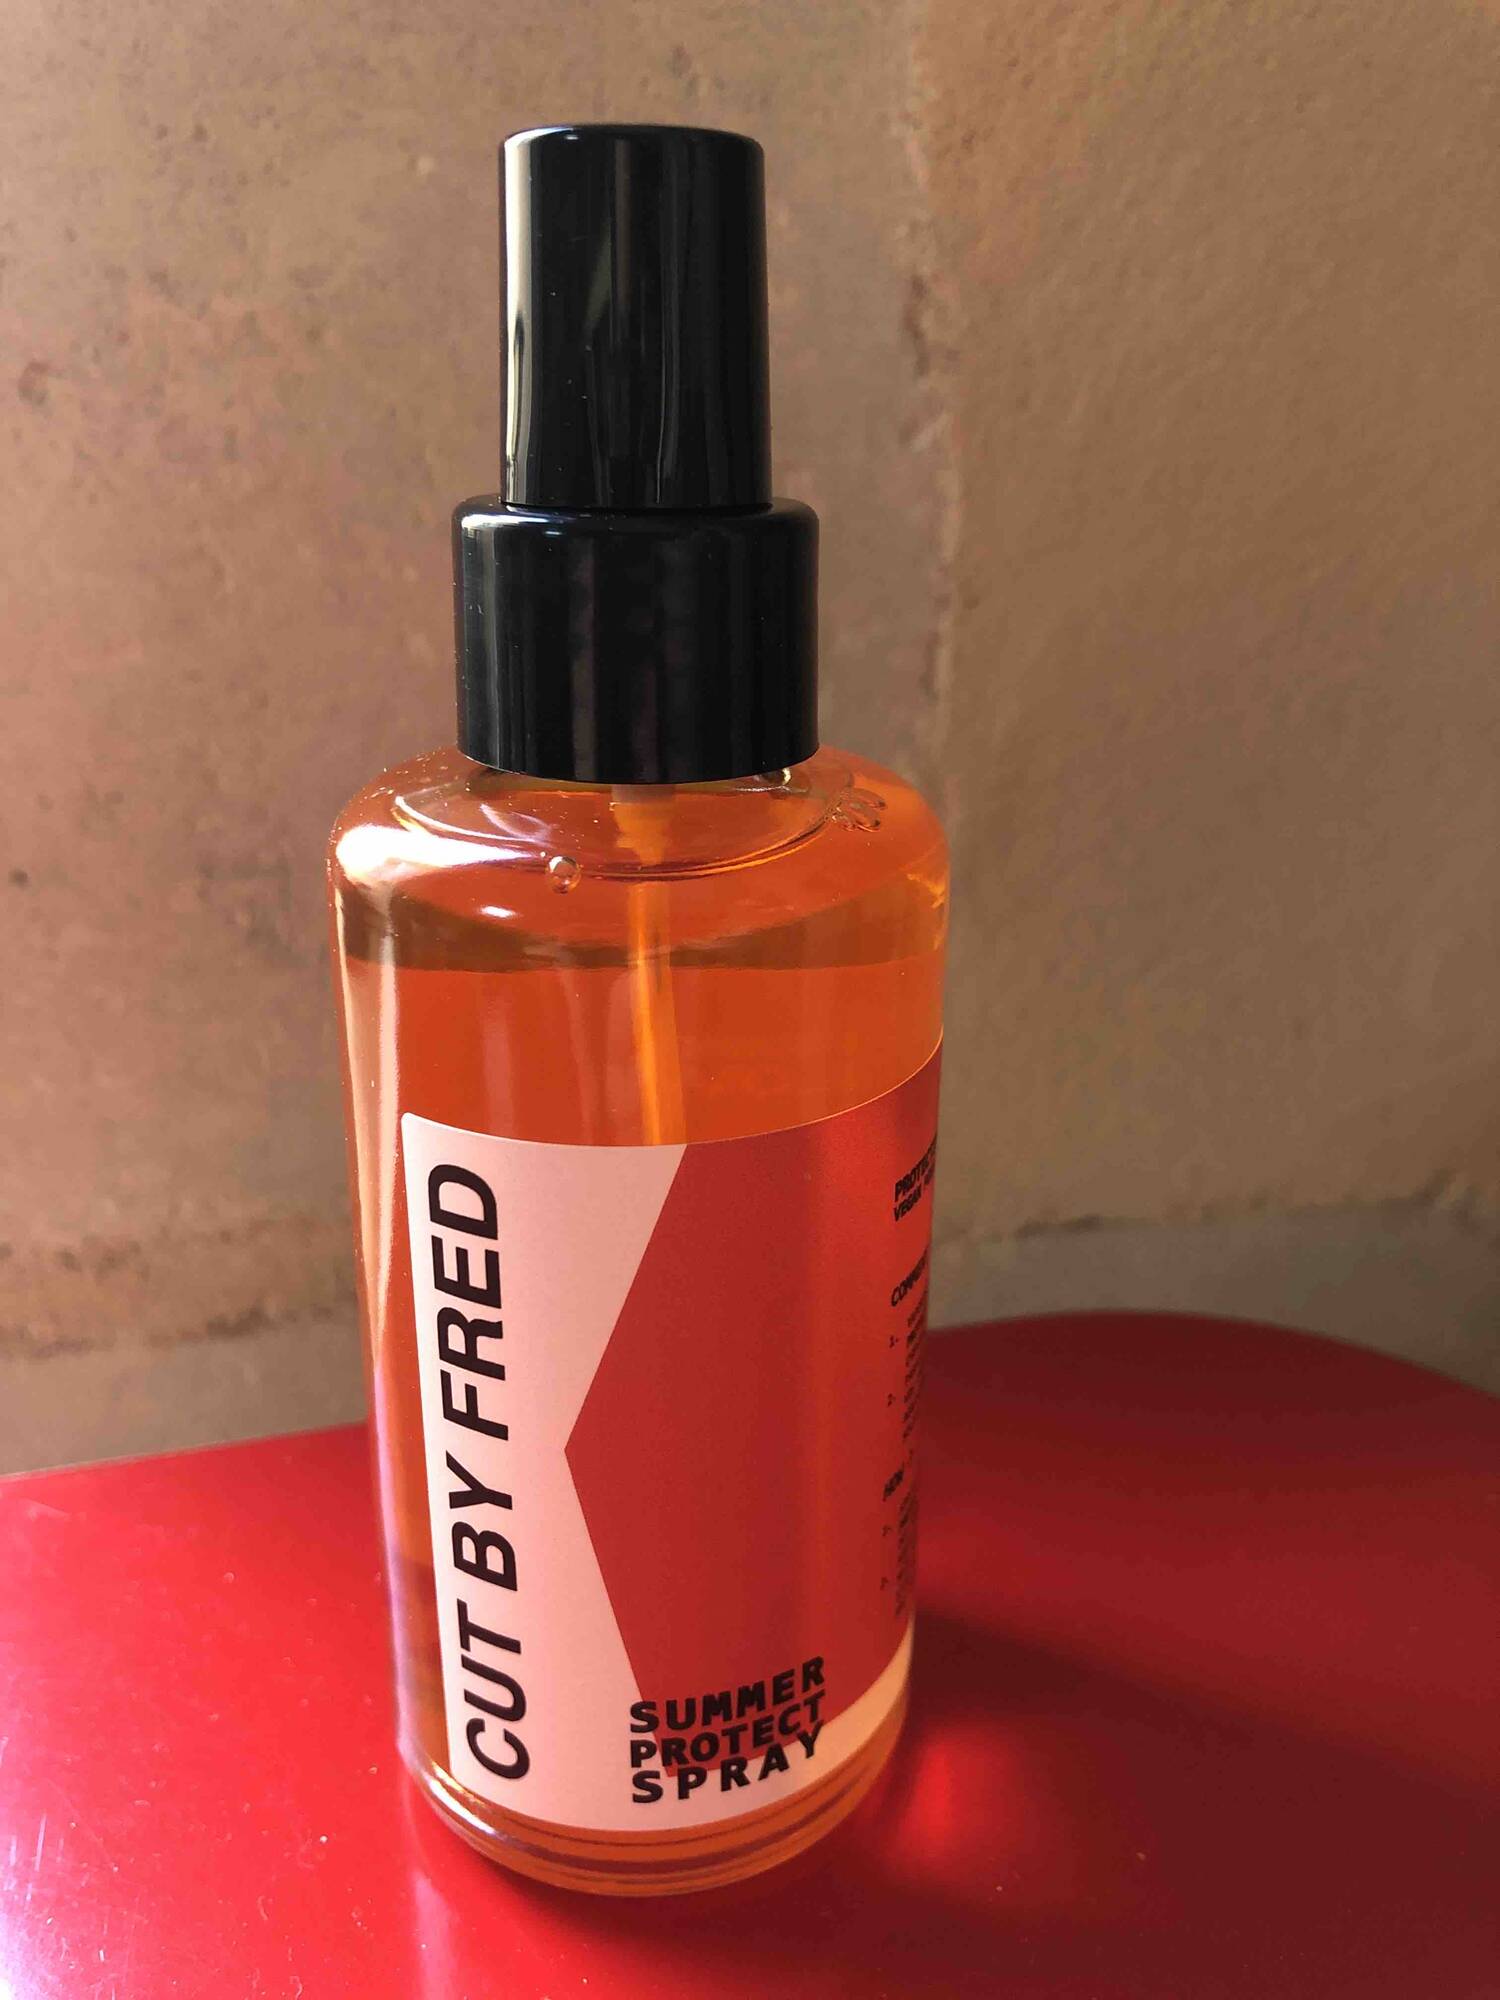 CUT BY FRED - Summer protect spray